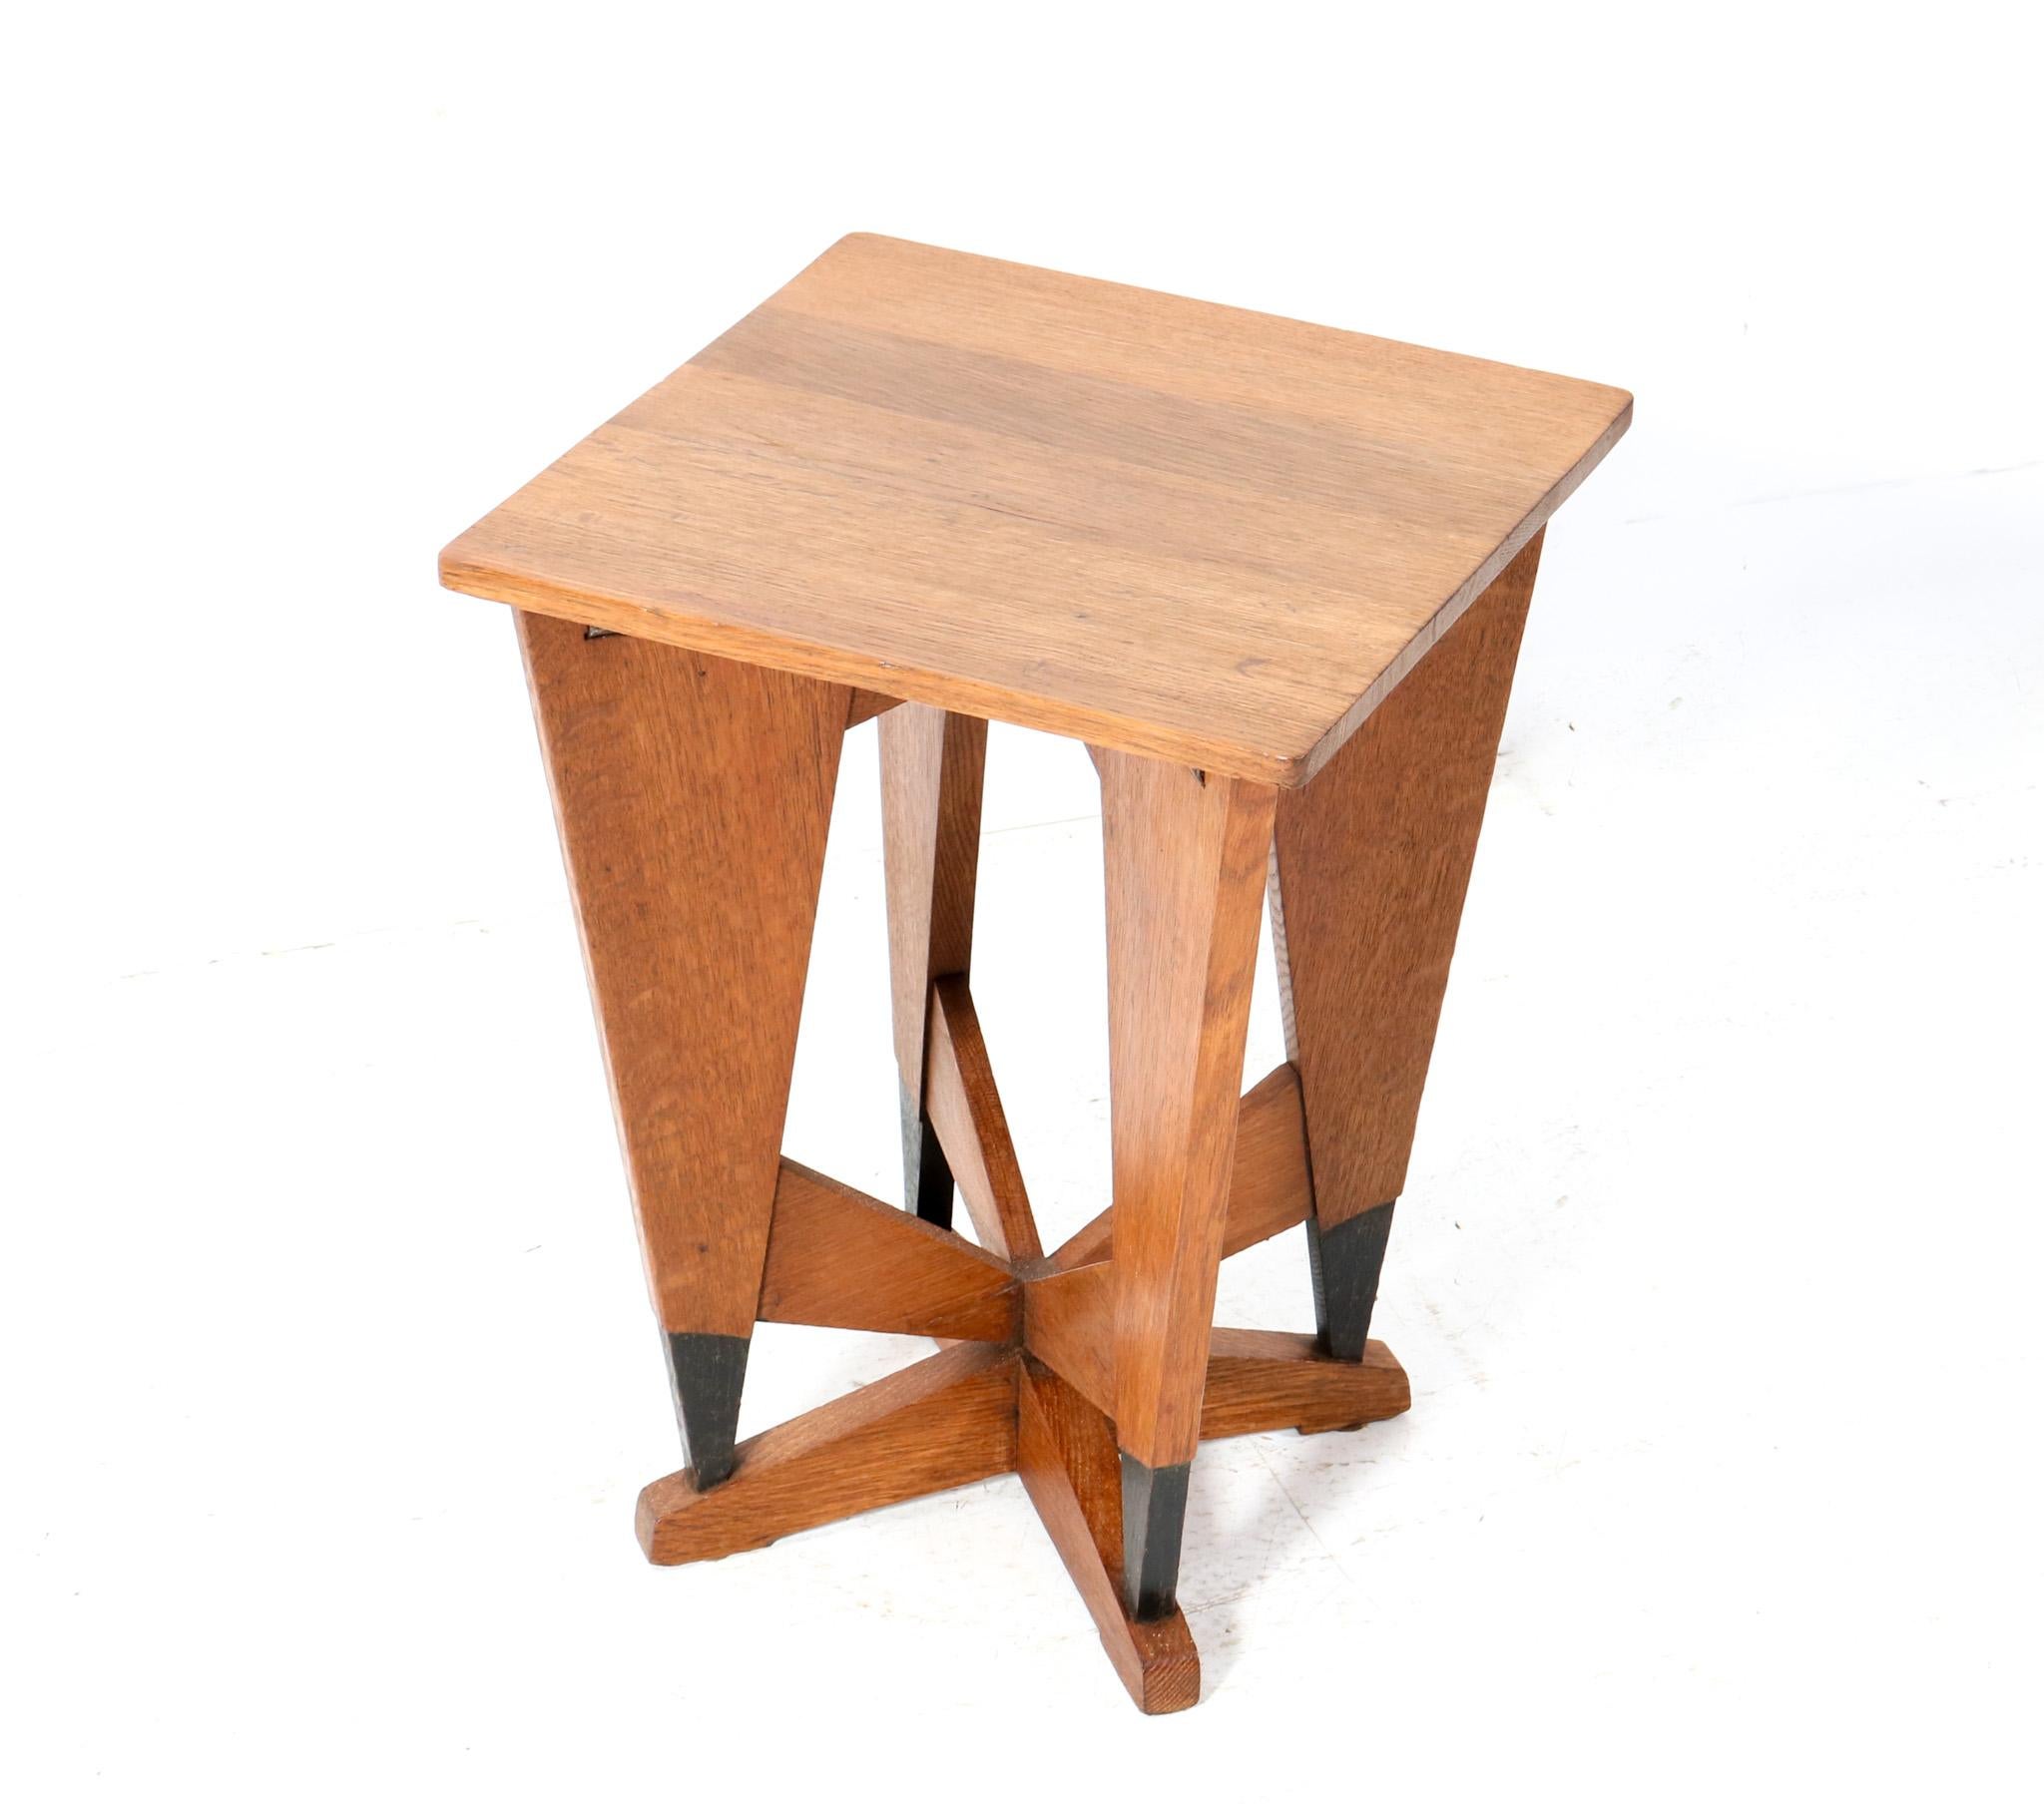 Stunning and rare Art Deco Modernist side table.
Design by P.E.L. Izeren for De Genneper Molen.
Striking Dutch design from the 1920s.
Solid oak base and top with original black lacquered elements.
In very good original condition with minor wear